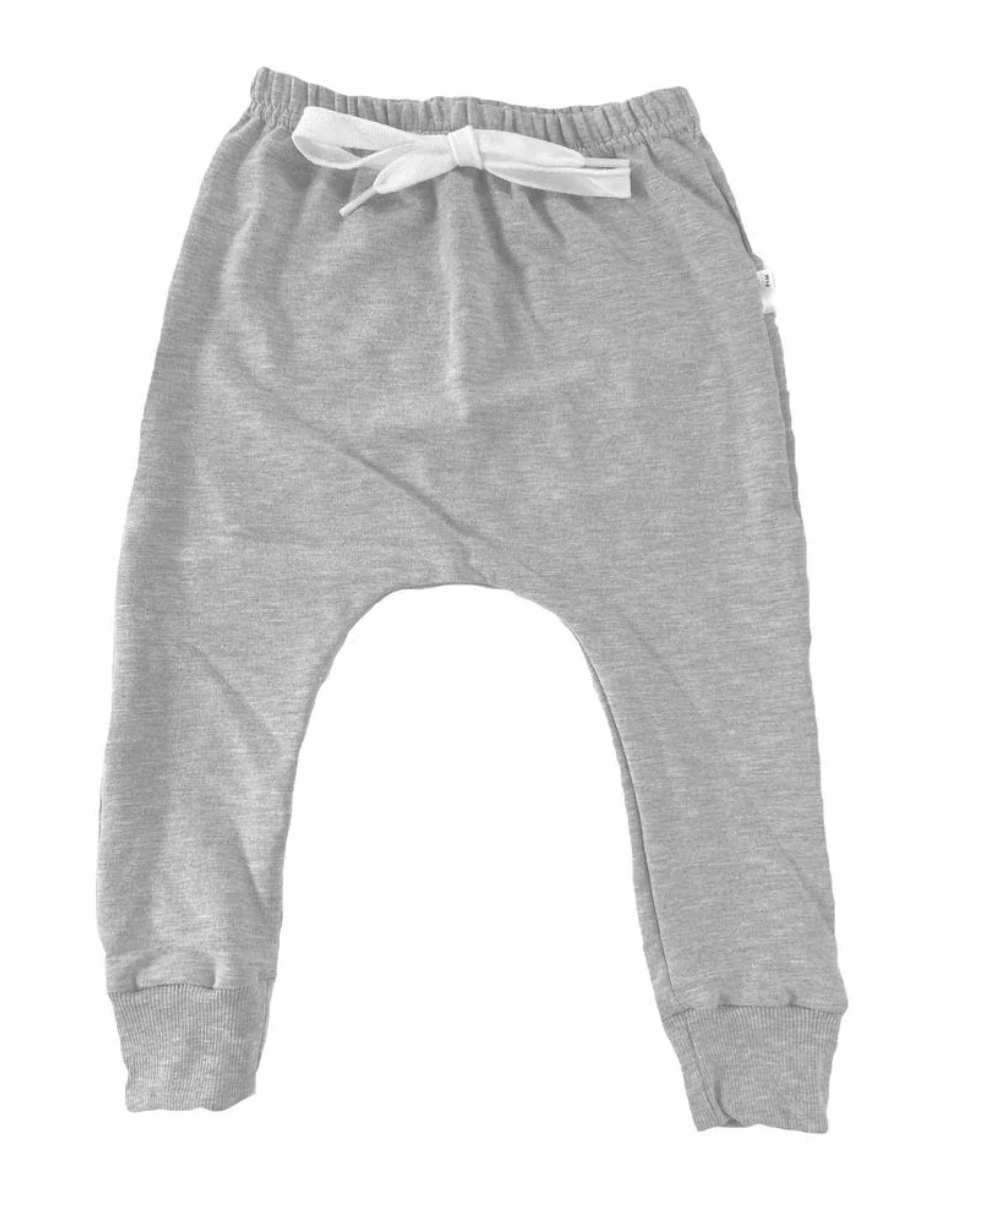 The Joggers